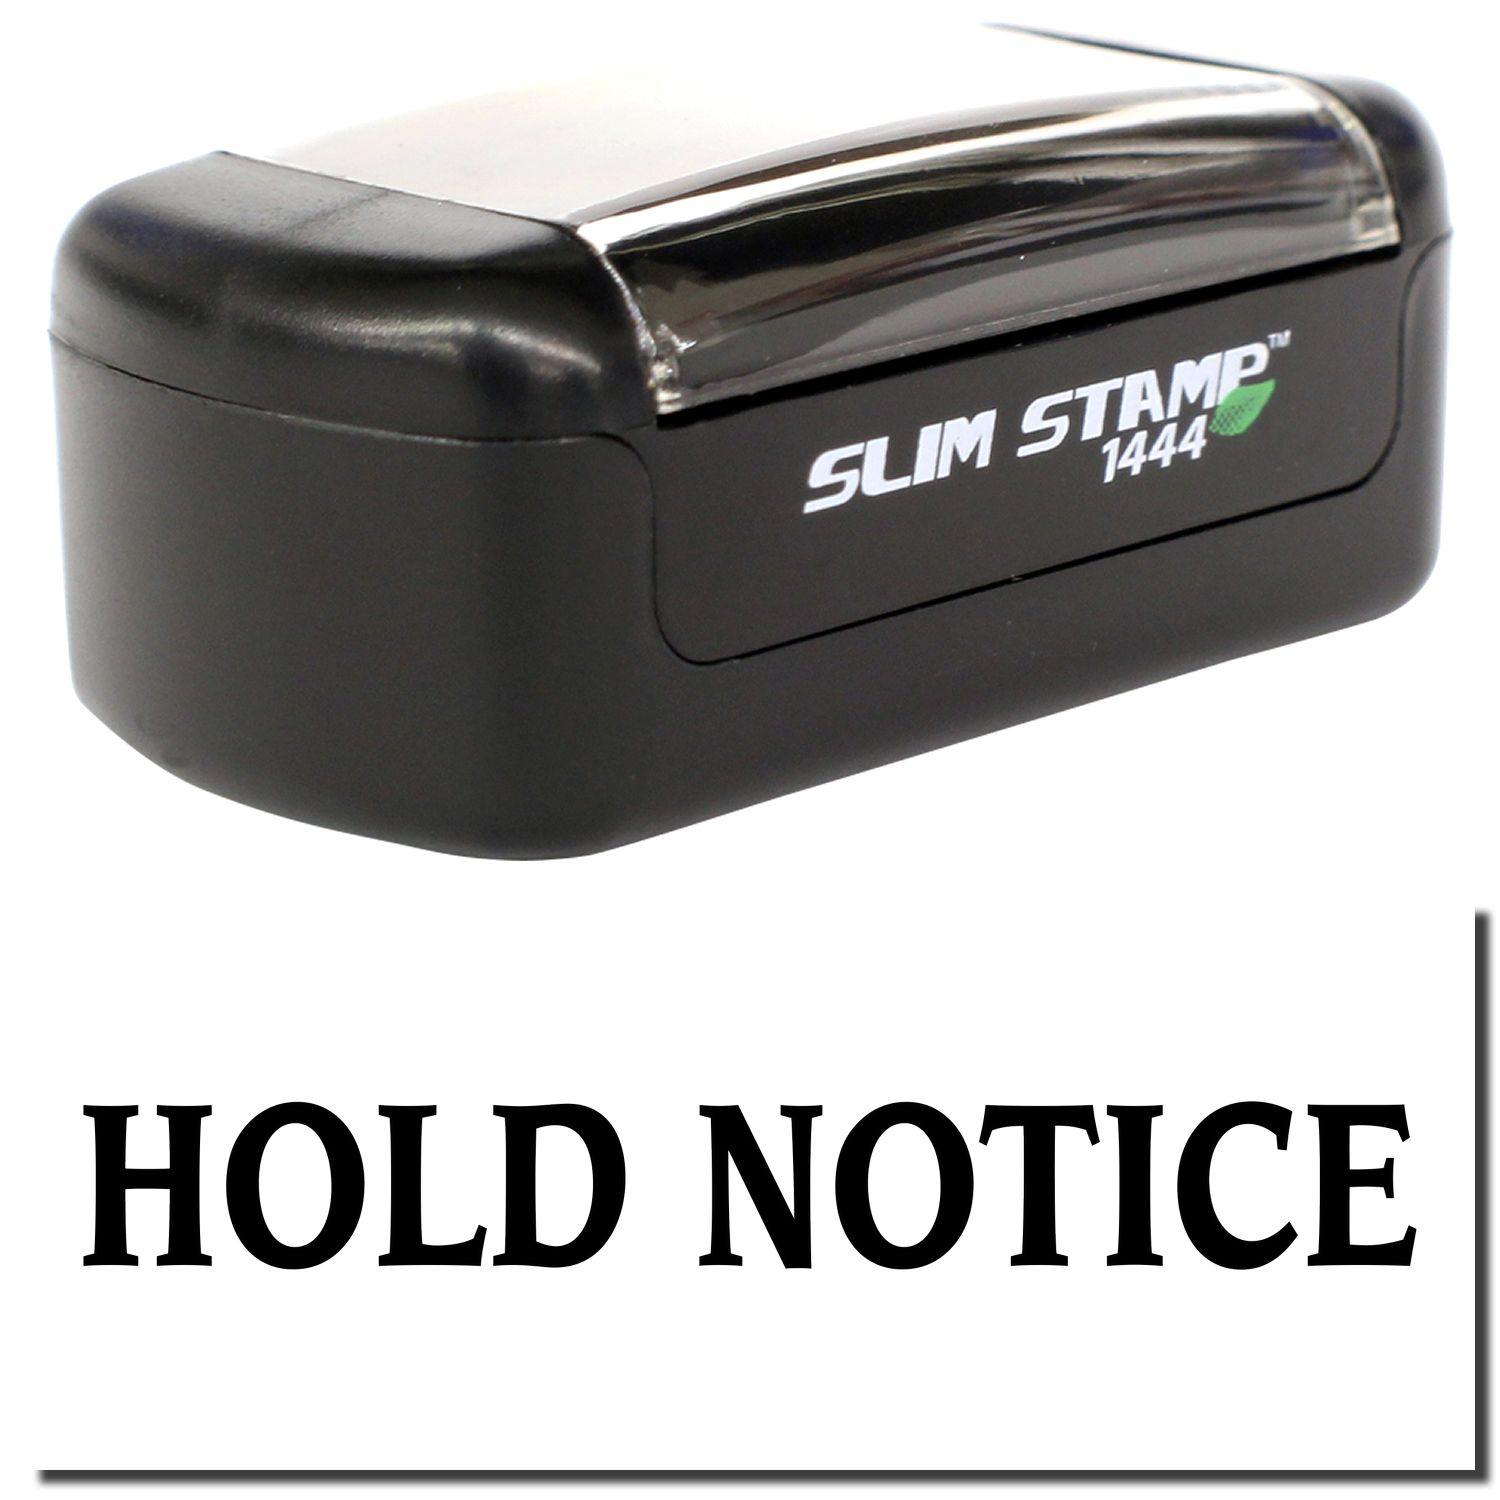 A stock office pre-inked stamp with a stamped image showing how the text "HOLD NOTICE" is displayed after stamping.